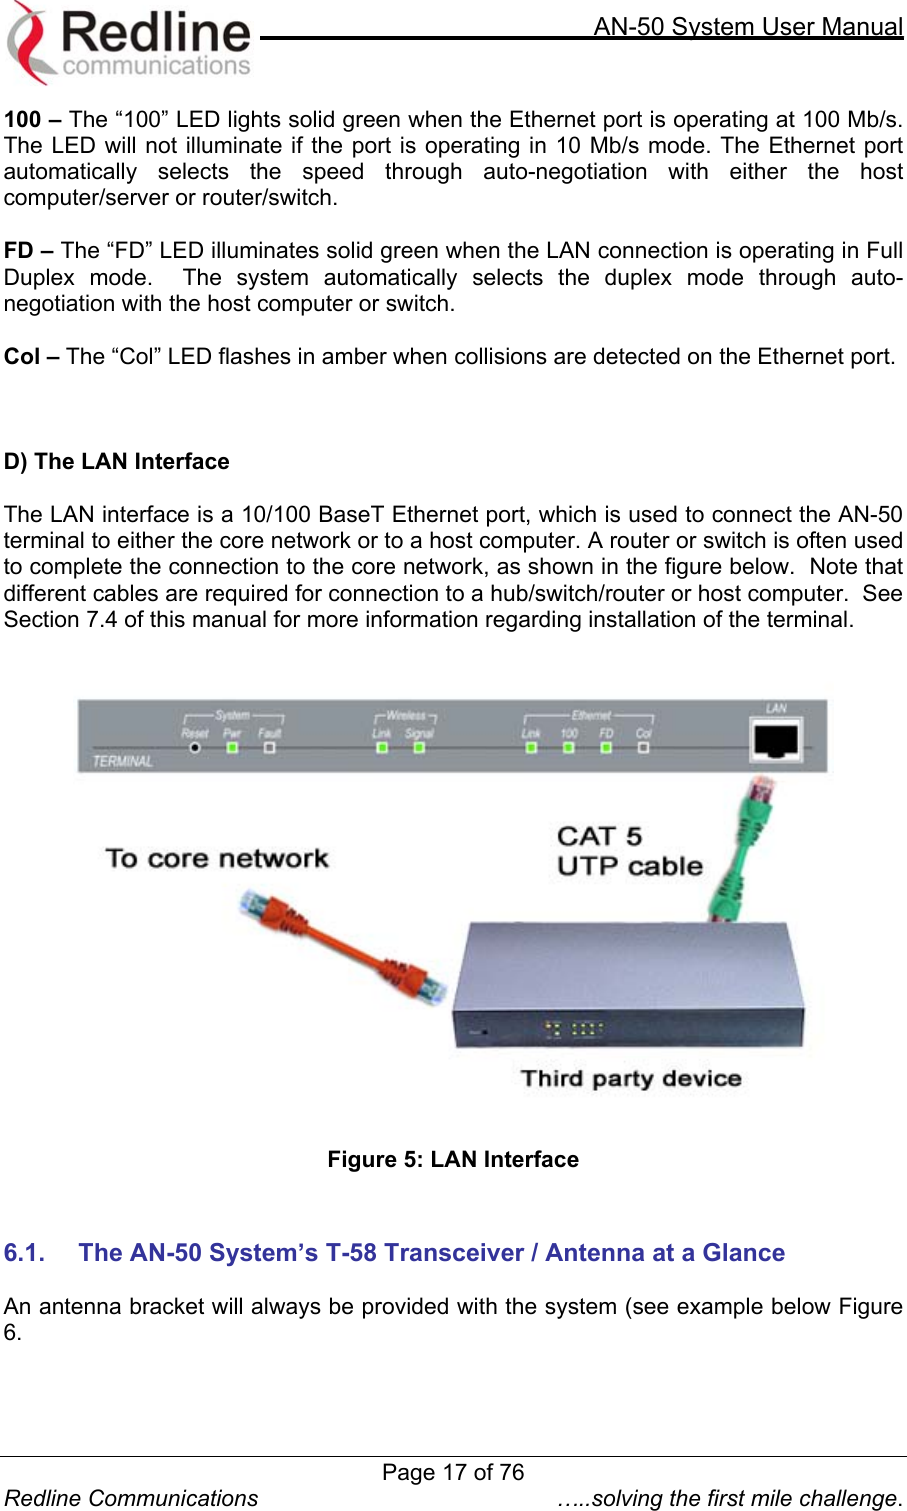     AN-50 System User Manual  Redline Communications  …..solving the first mile challenge. 100 – The “100” LED lights solid green when the Ethernet port is operating at 100 Mb/s.  The LED will not illuminate if the port is operating in 10 Mb/s mode. The Ethernet port automatically selects the speed through auto-negotiation with either the host computer/server or router/switch.  FD – The “FD” LED illuminates solid green when the LAN connection is operating in Full Duplex mode.  The system automatically selects the duplex mode through auto-negotiation with the host computer or switch.    Col – The “Col” LED flashes in amber when collisions are detected on the Ethernet port.      D) The LAN Interface  The LAN interface is a 10/100 BaseT Ethernet port, which is used to connect the AN-50 terminal to either the core network or to a host computer. A router or switch is often used to complete the connection to the core network, as shown in the figure below.  Note that different cables are required for connection to a hub/switch/router or host computer.  See Section 7.4 of this manual for more information regarding installation of the terminal.    Figure 5: LAN Interface   6.1.  The AN-50 System’s T-58 Transceiver / Antenna at a Glance  An antenna bracket will always be provided with the system (see example below Figure 6.     Page 17 of 76